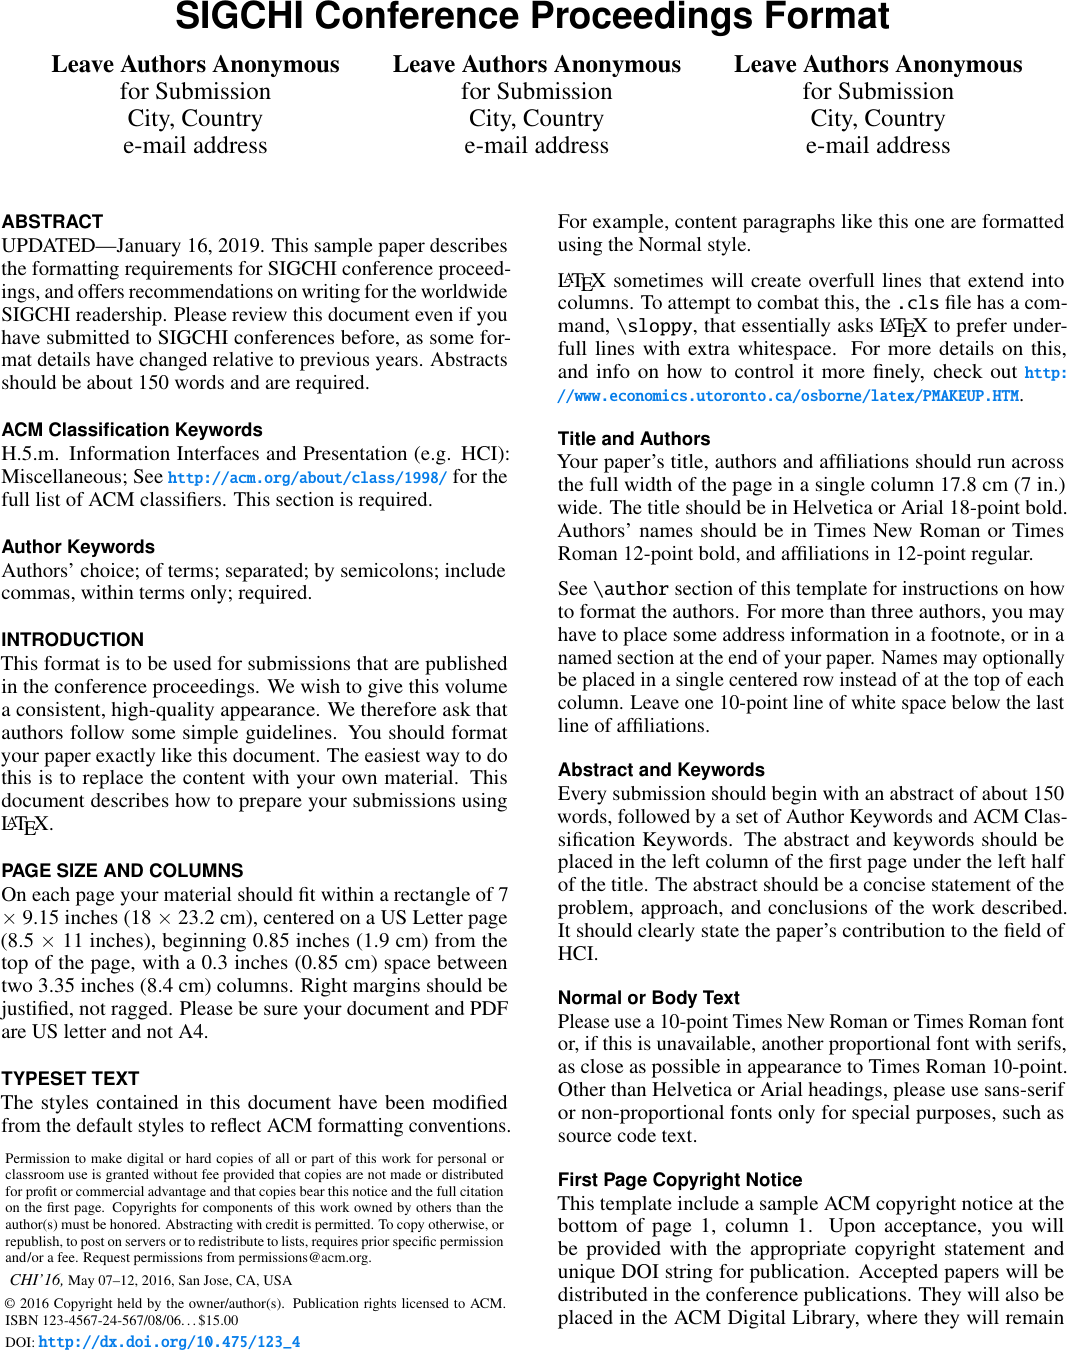 Page 1 of 4 - SIGCHI Conference Proceedings Format Instructions